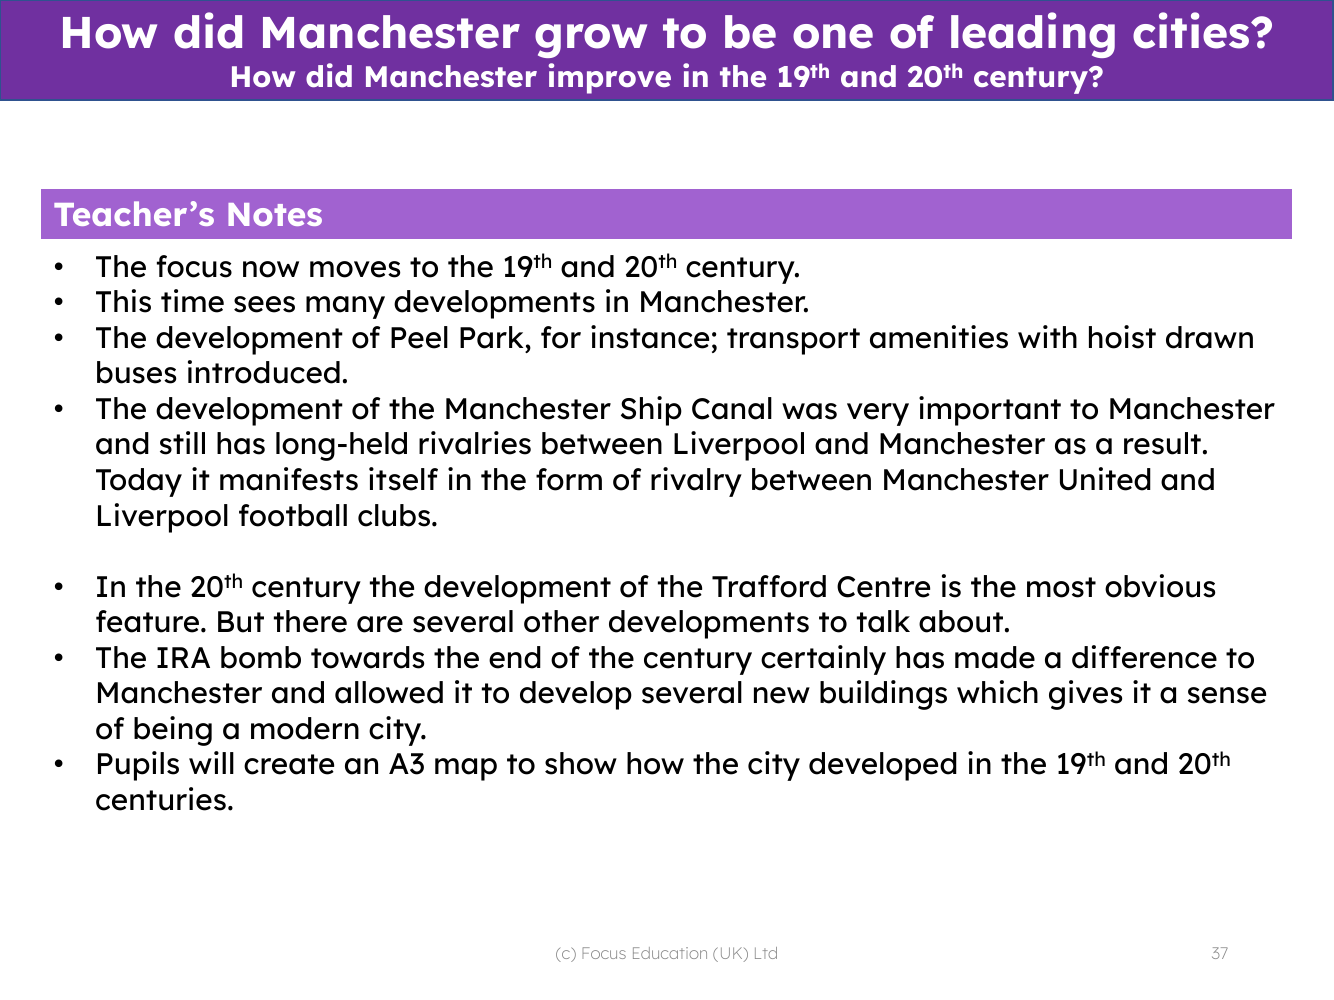 How did Manchester improve in the 19th and 20th centuries? - Teacher notes